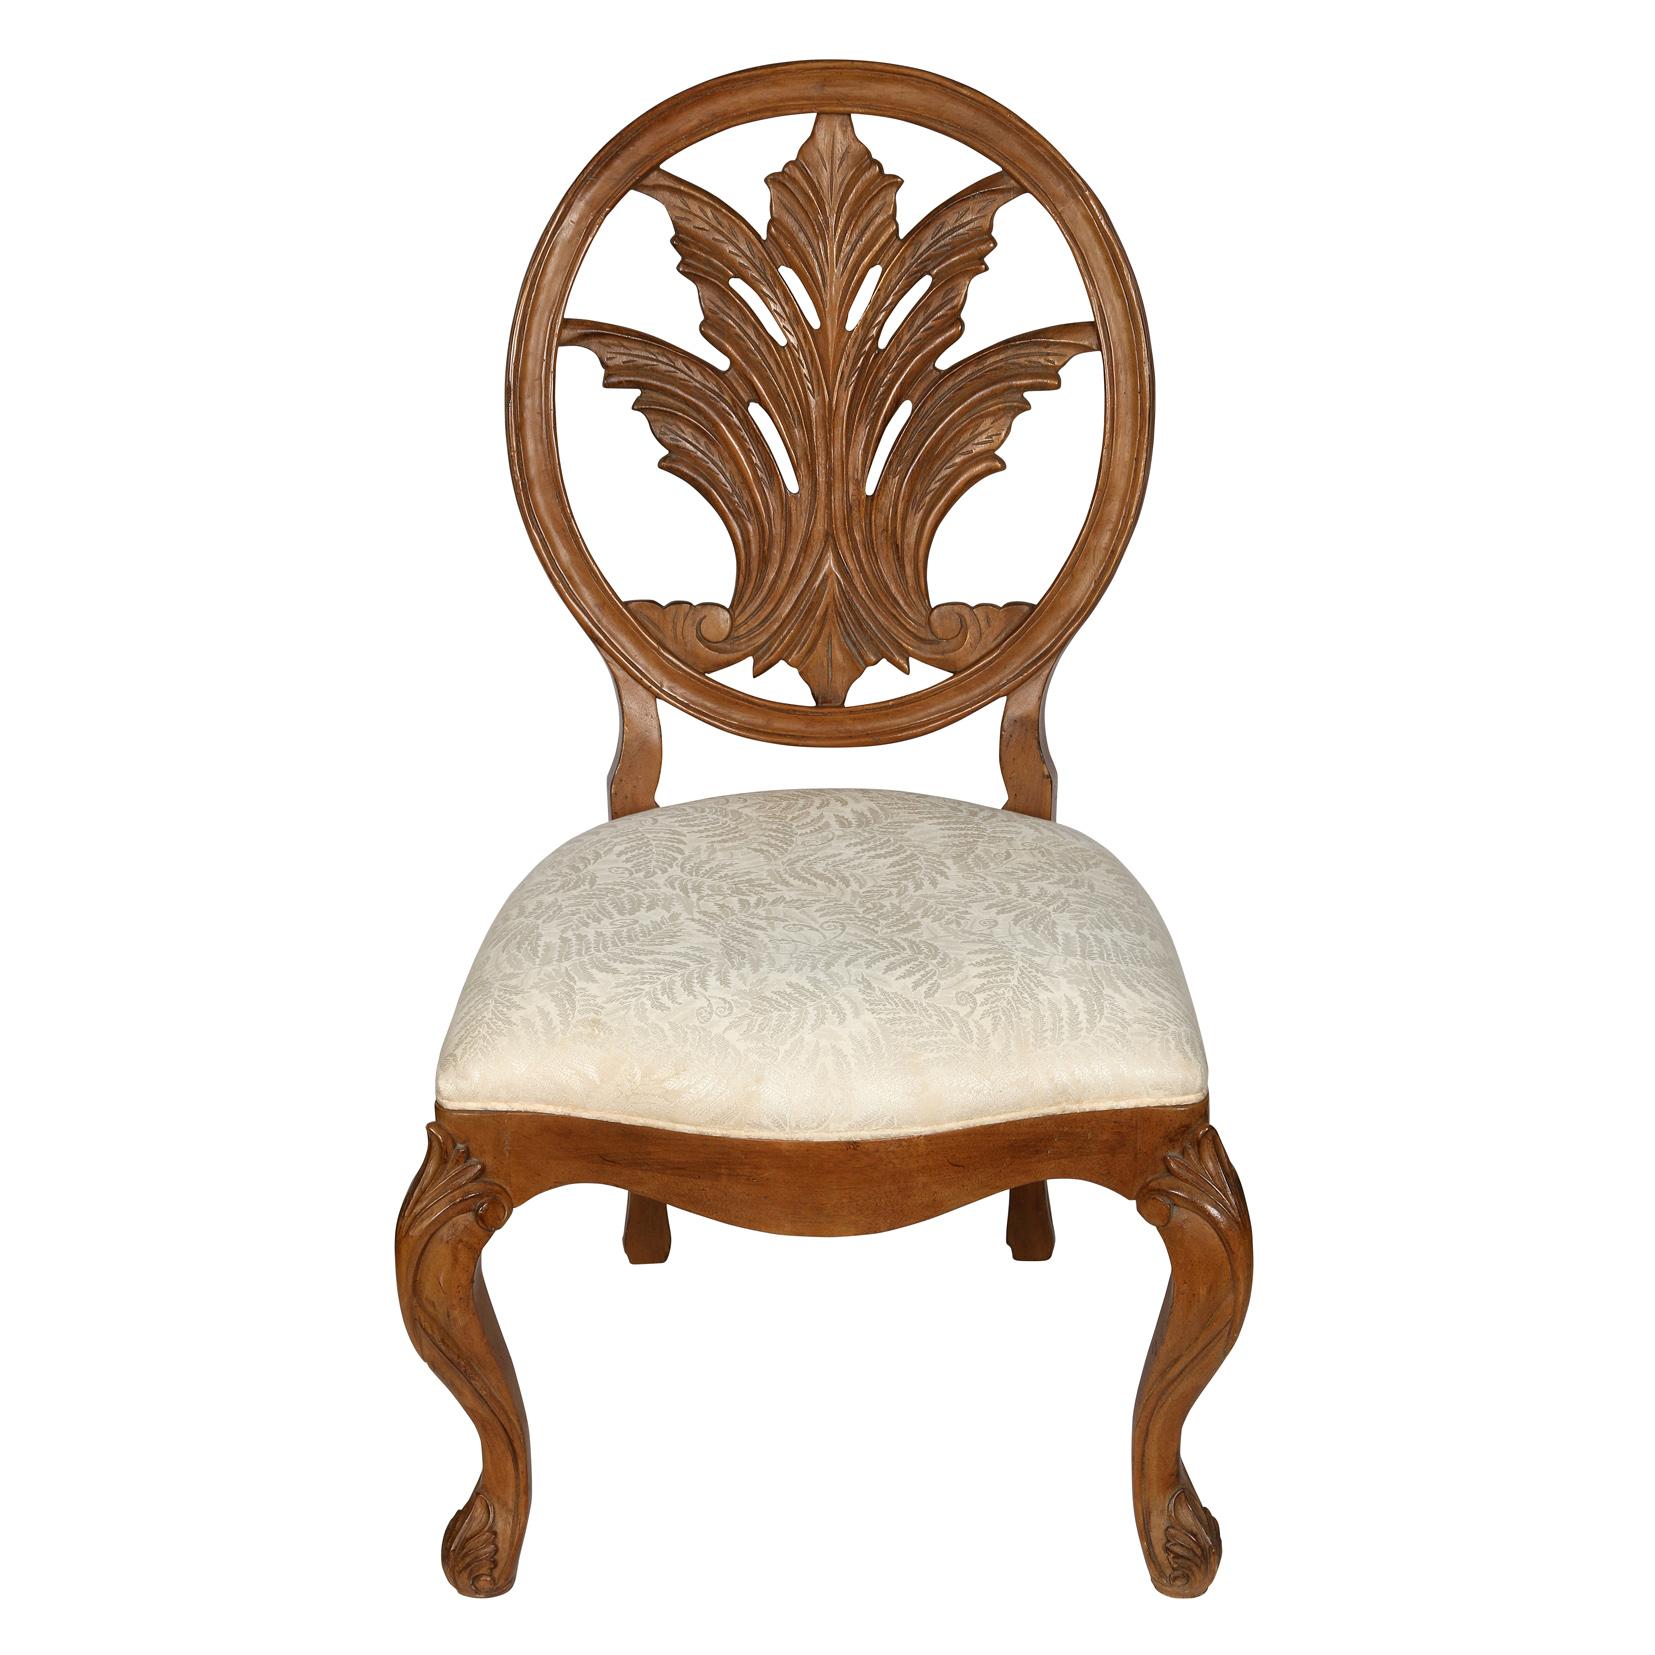 Set of four carved oak palm frond motif side chairs by Century with upholstered seats.